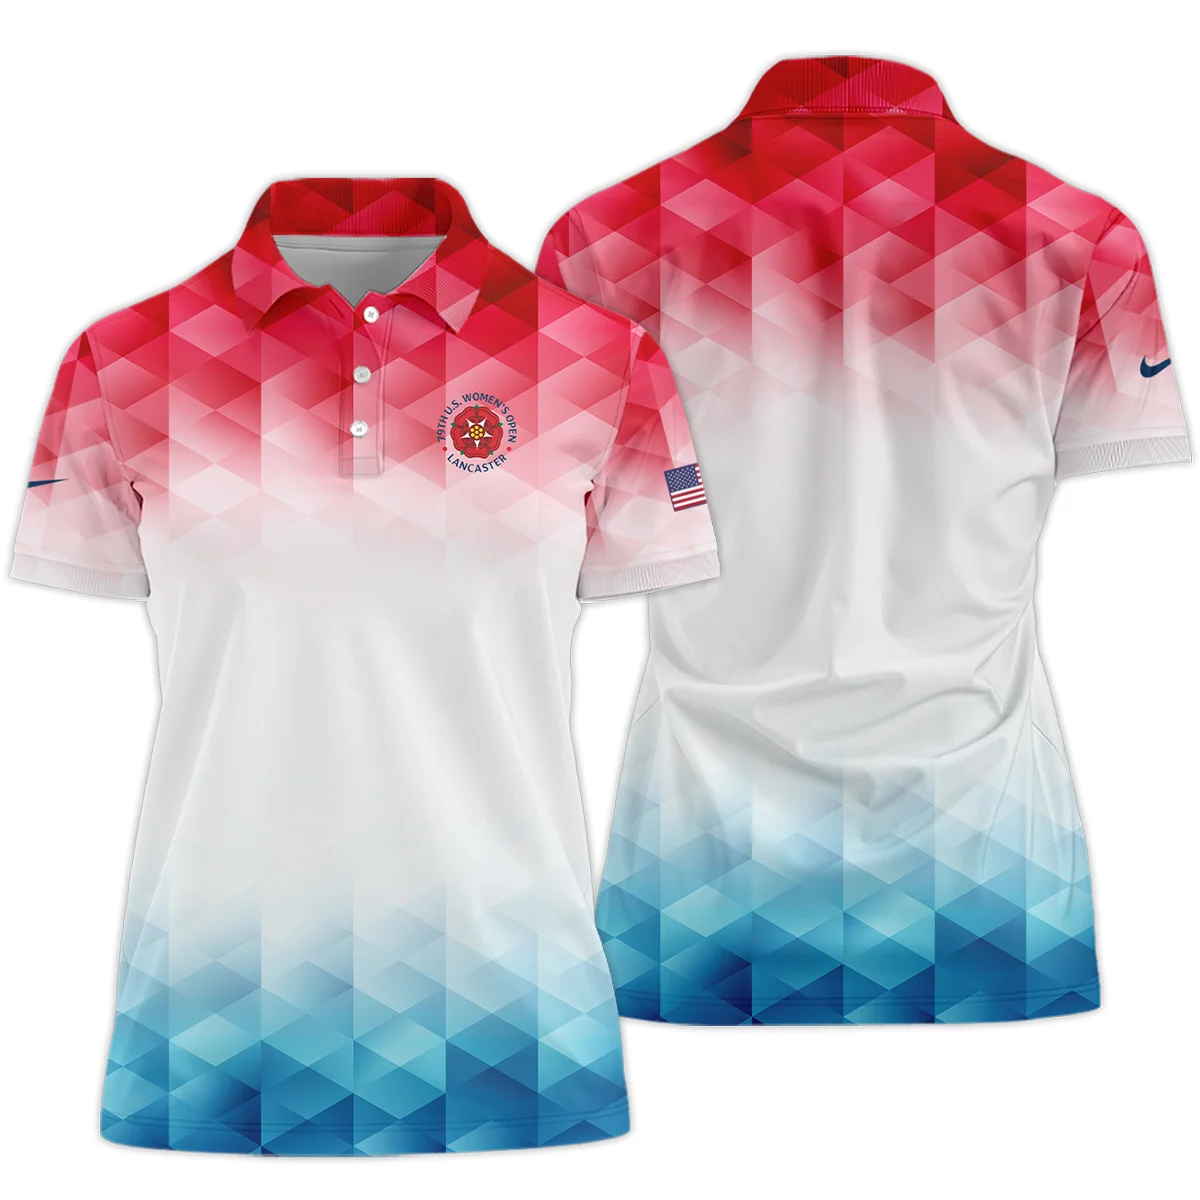 79th U.S. Women's Open Lancaster Nike Blue Red Abstract Short Polo Shirt